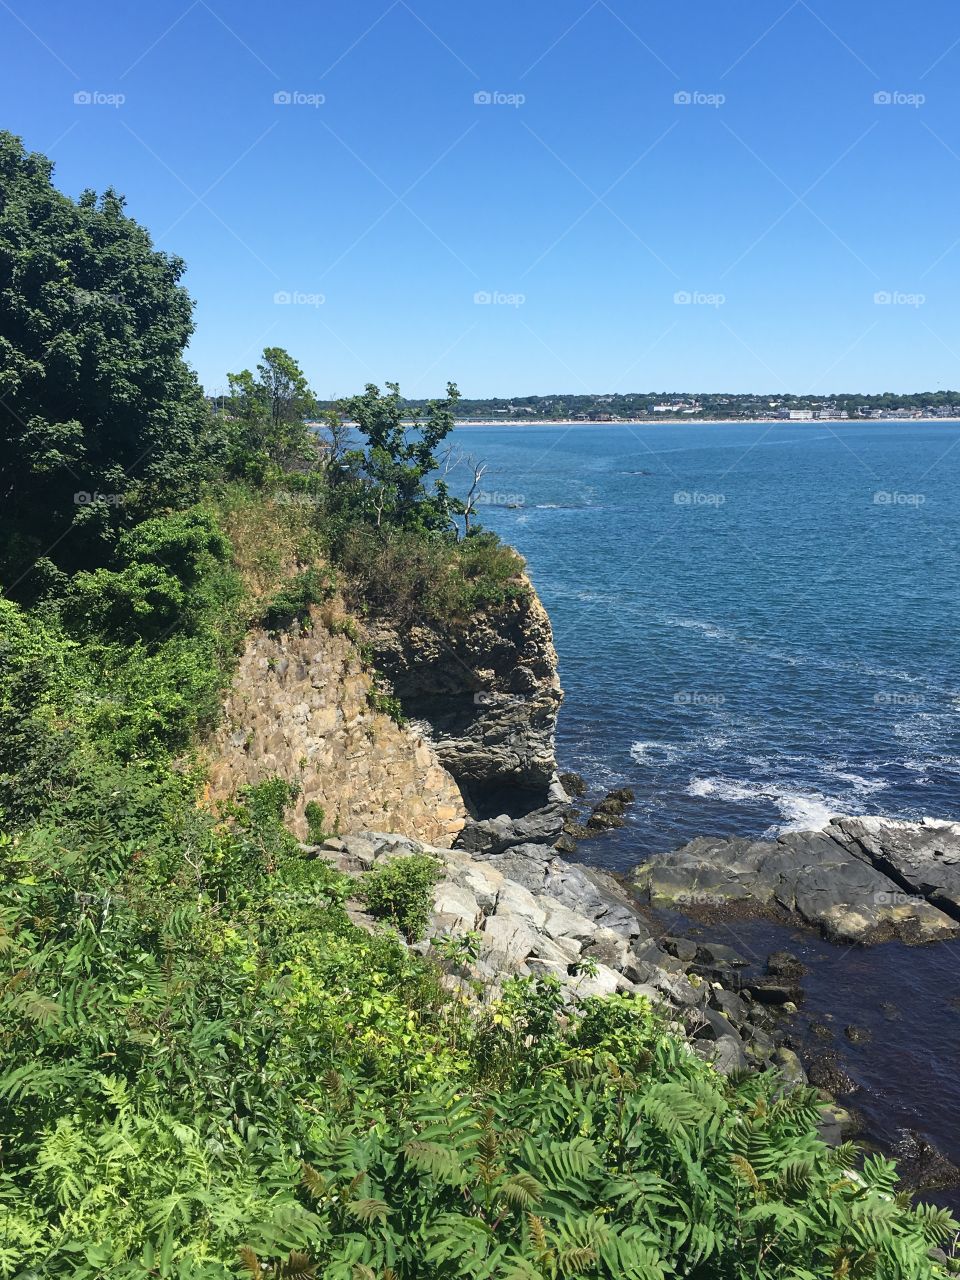 A view of the ocean. Taken on the Cliff Walk pathway around the Newport mansions in Rhode Island 